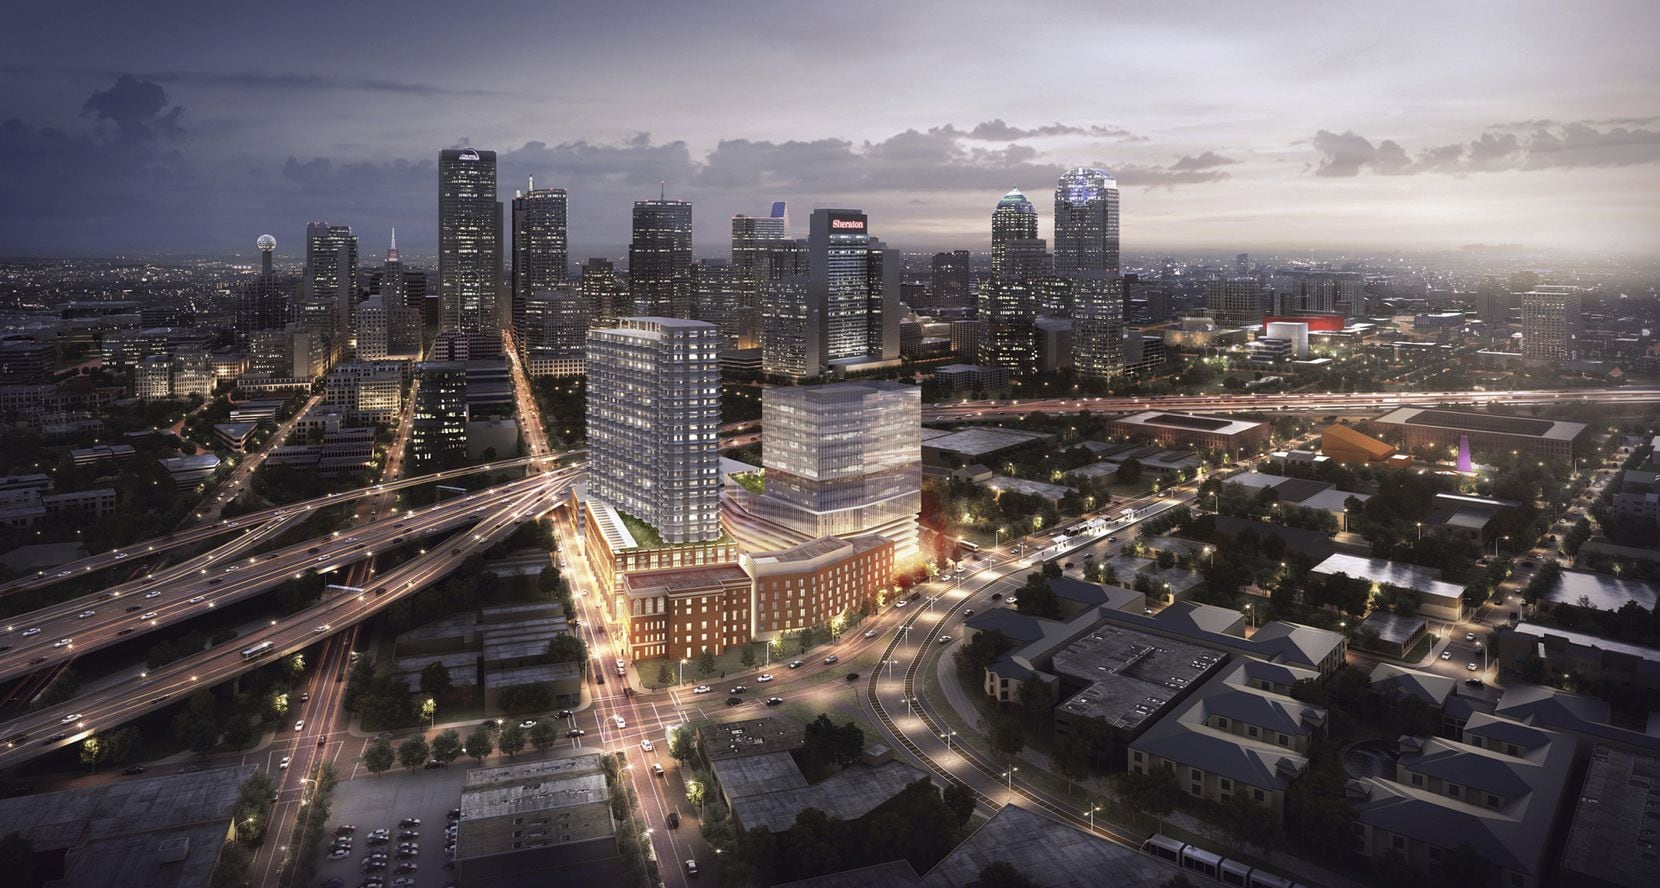 The 8-acre Epic project includes the new Kimpton Hotel, an office tower and apartment high-rise